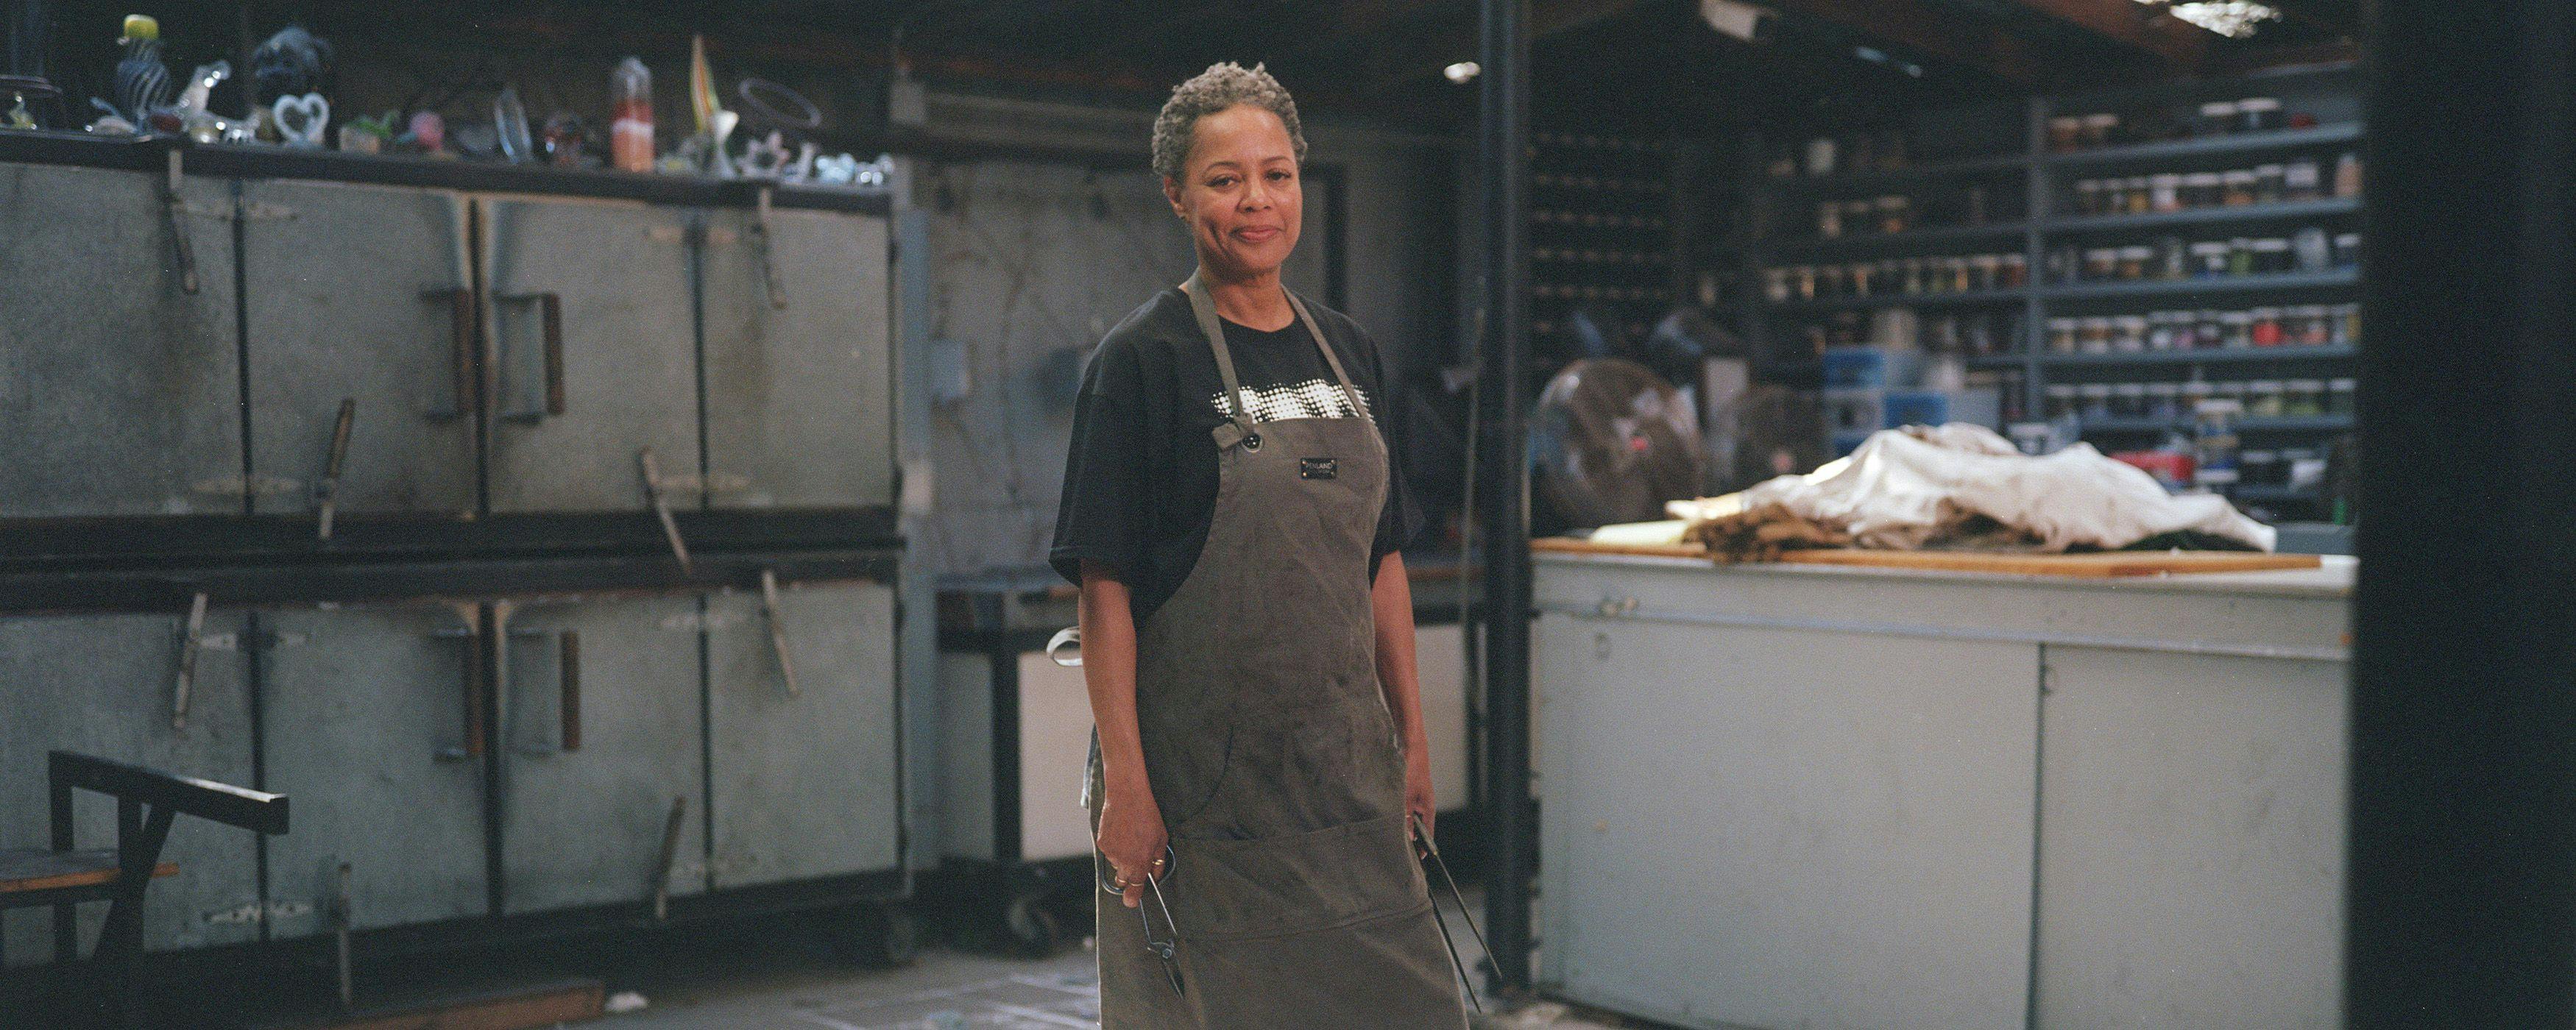 A woman with short grey hair wears a work apron in an industrial-looking art studio